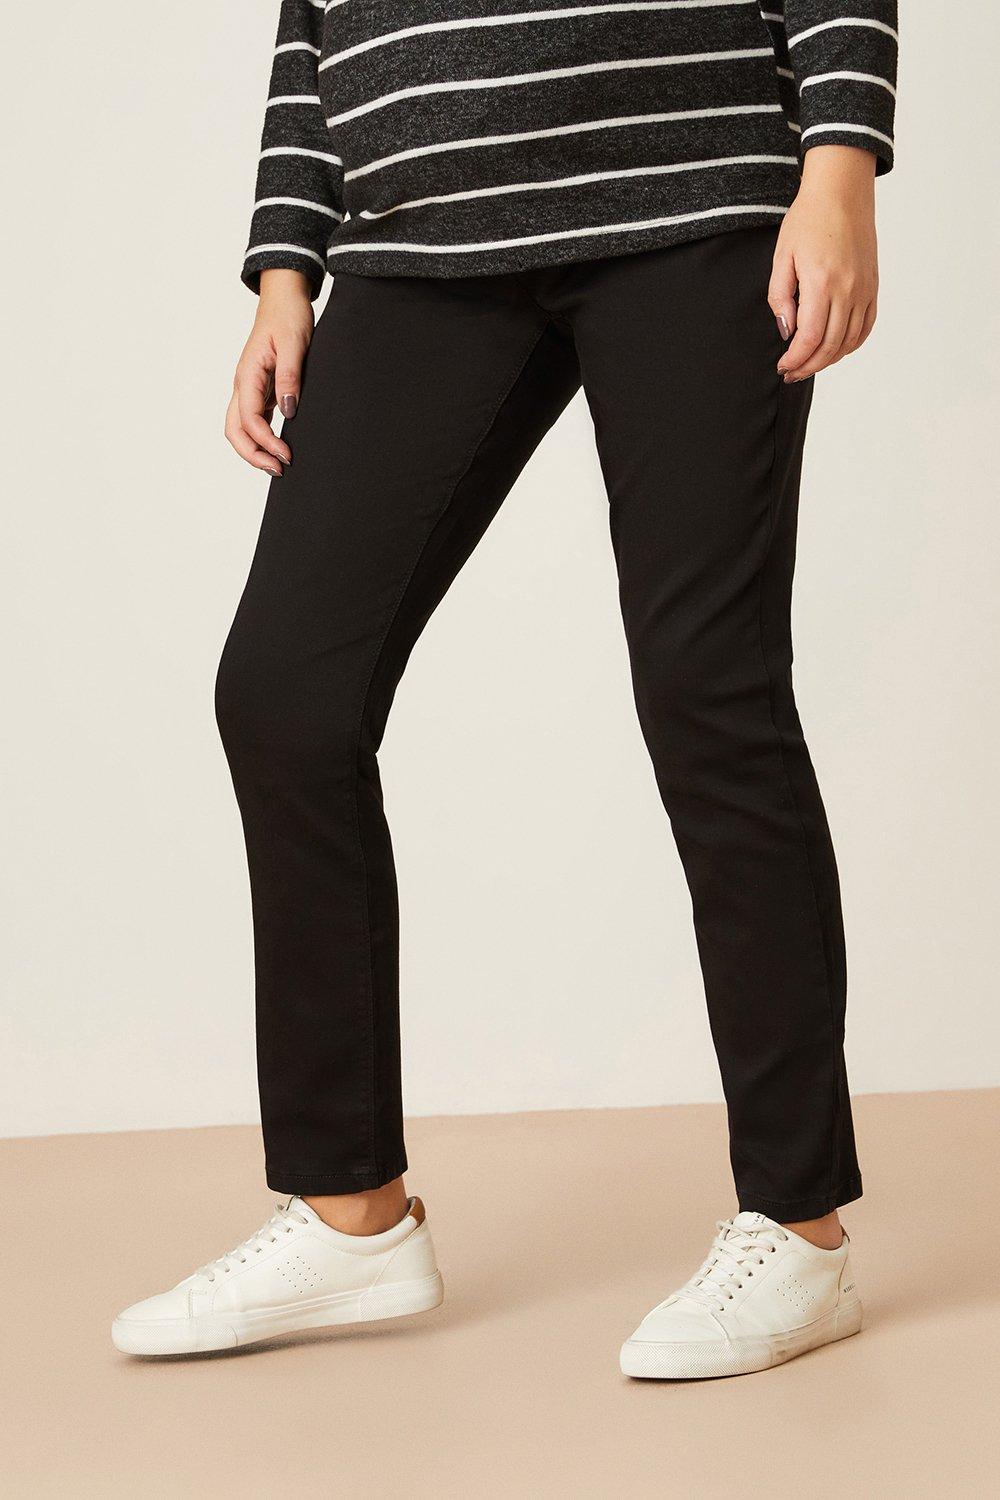 Womens Maternity Over Bump Frankie Jeans